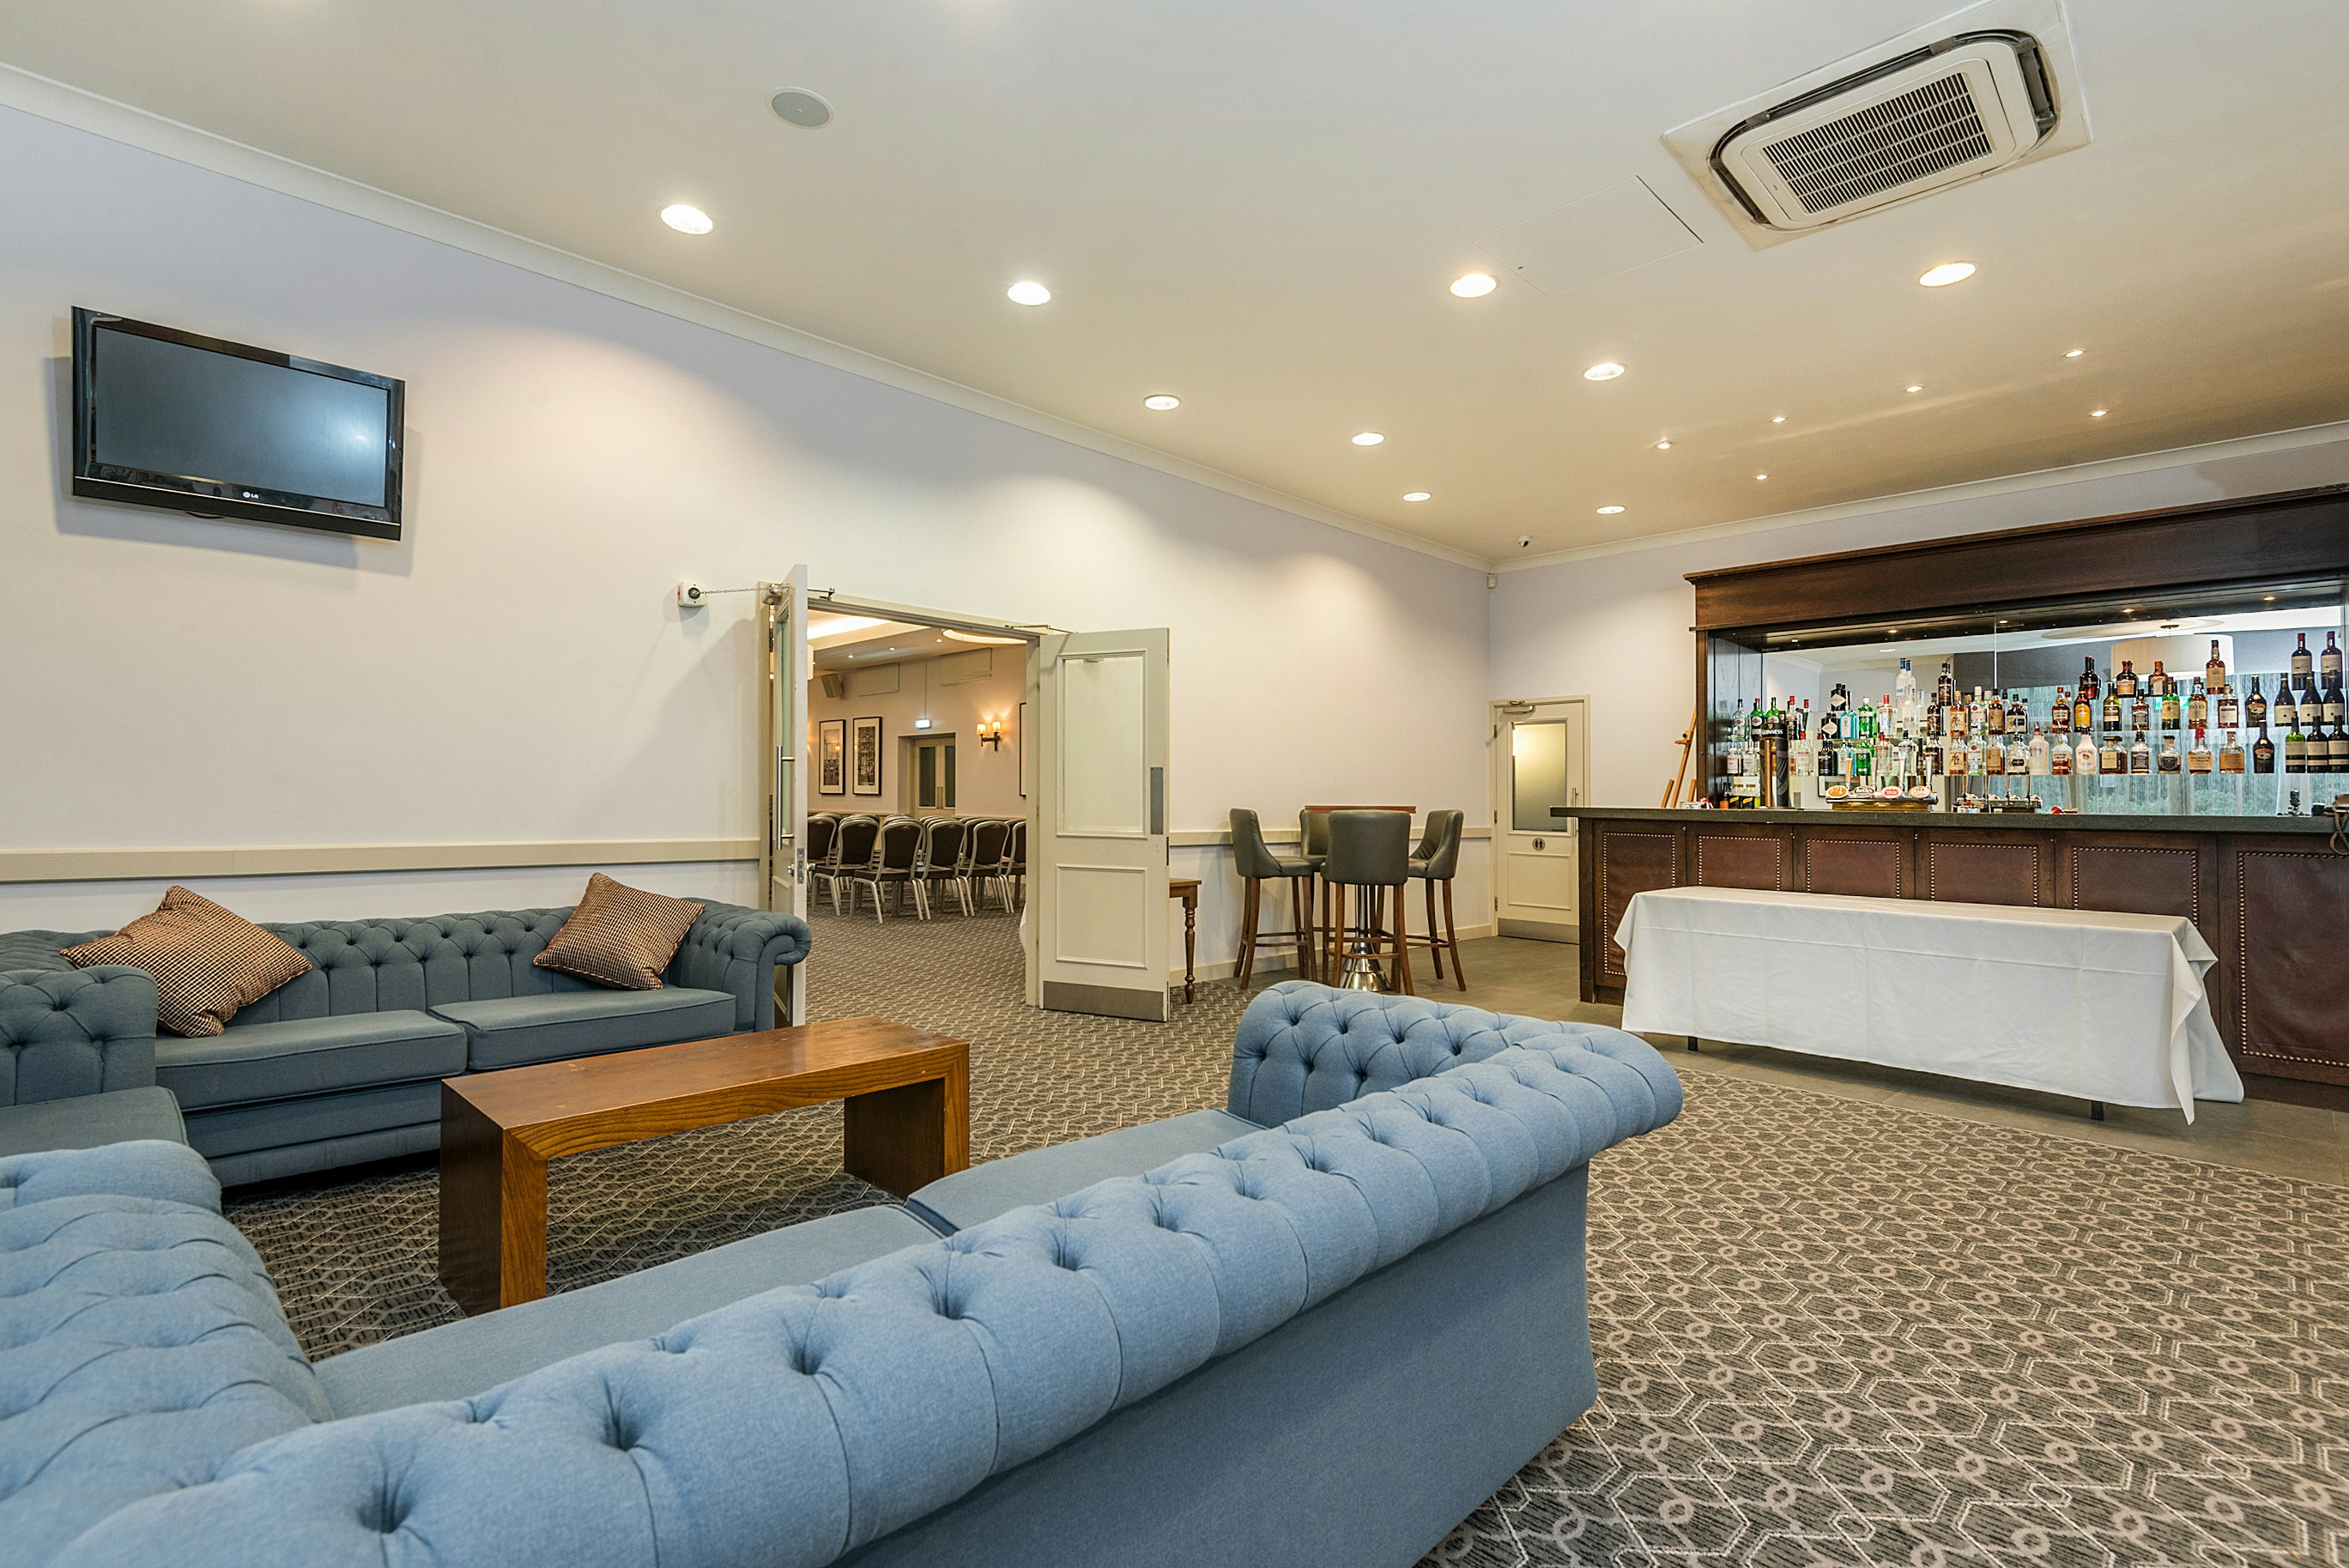 New Place Hotel - Hampshire - The Arden image 5